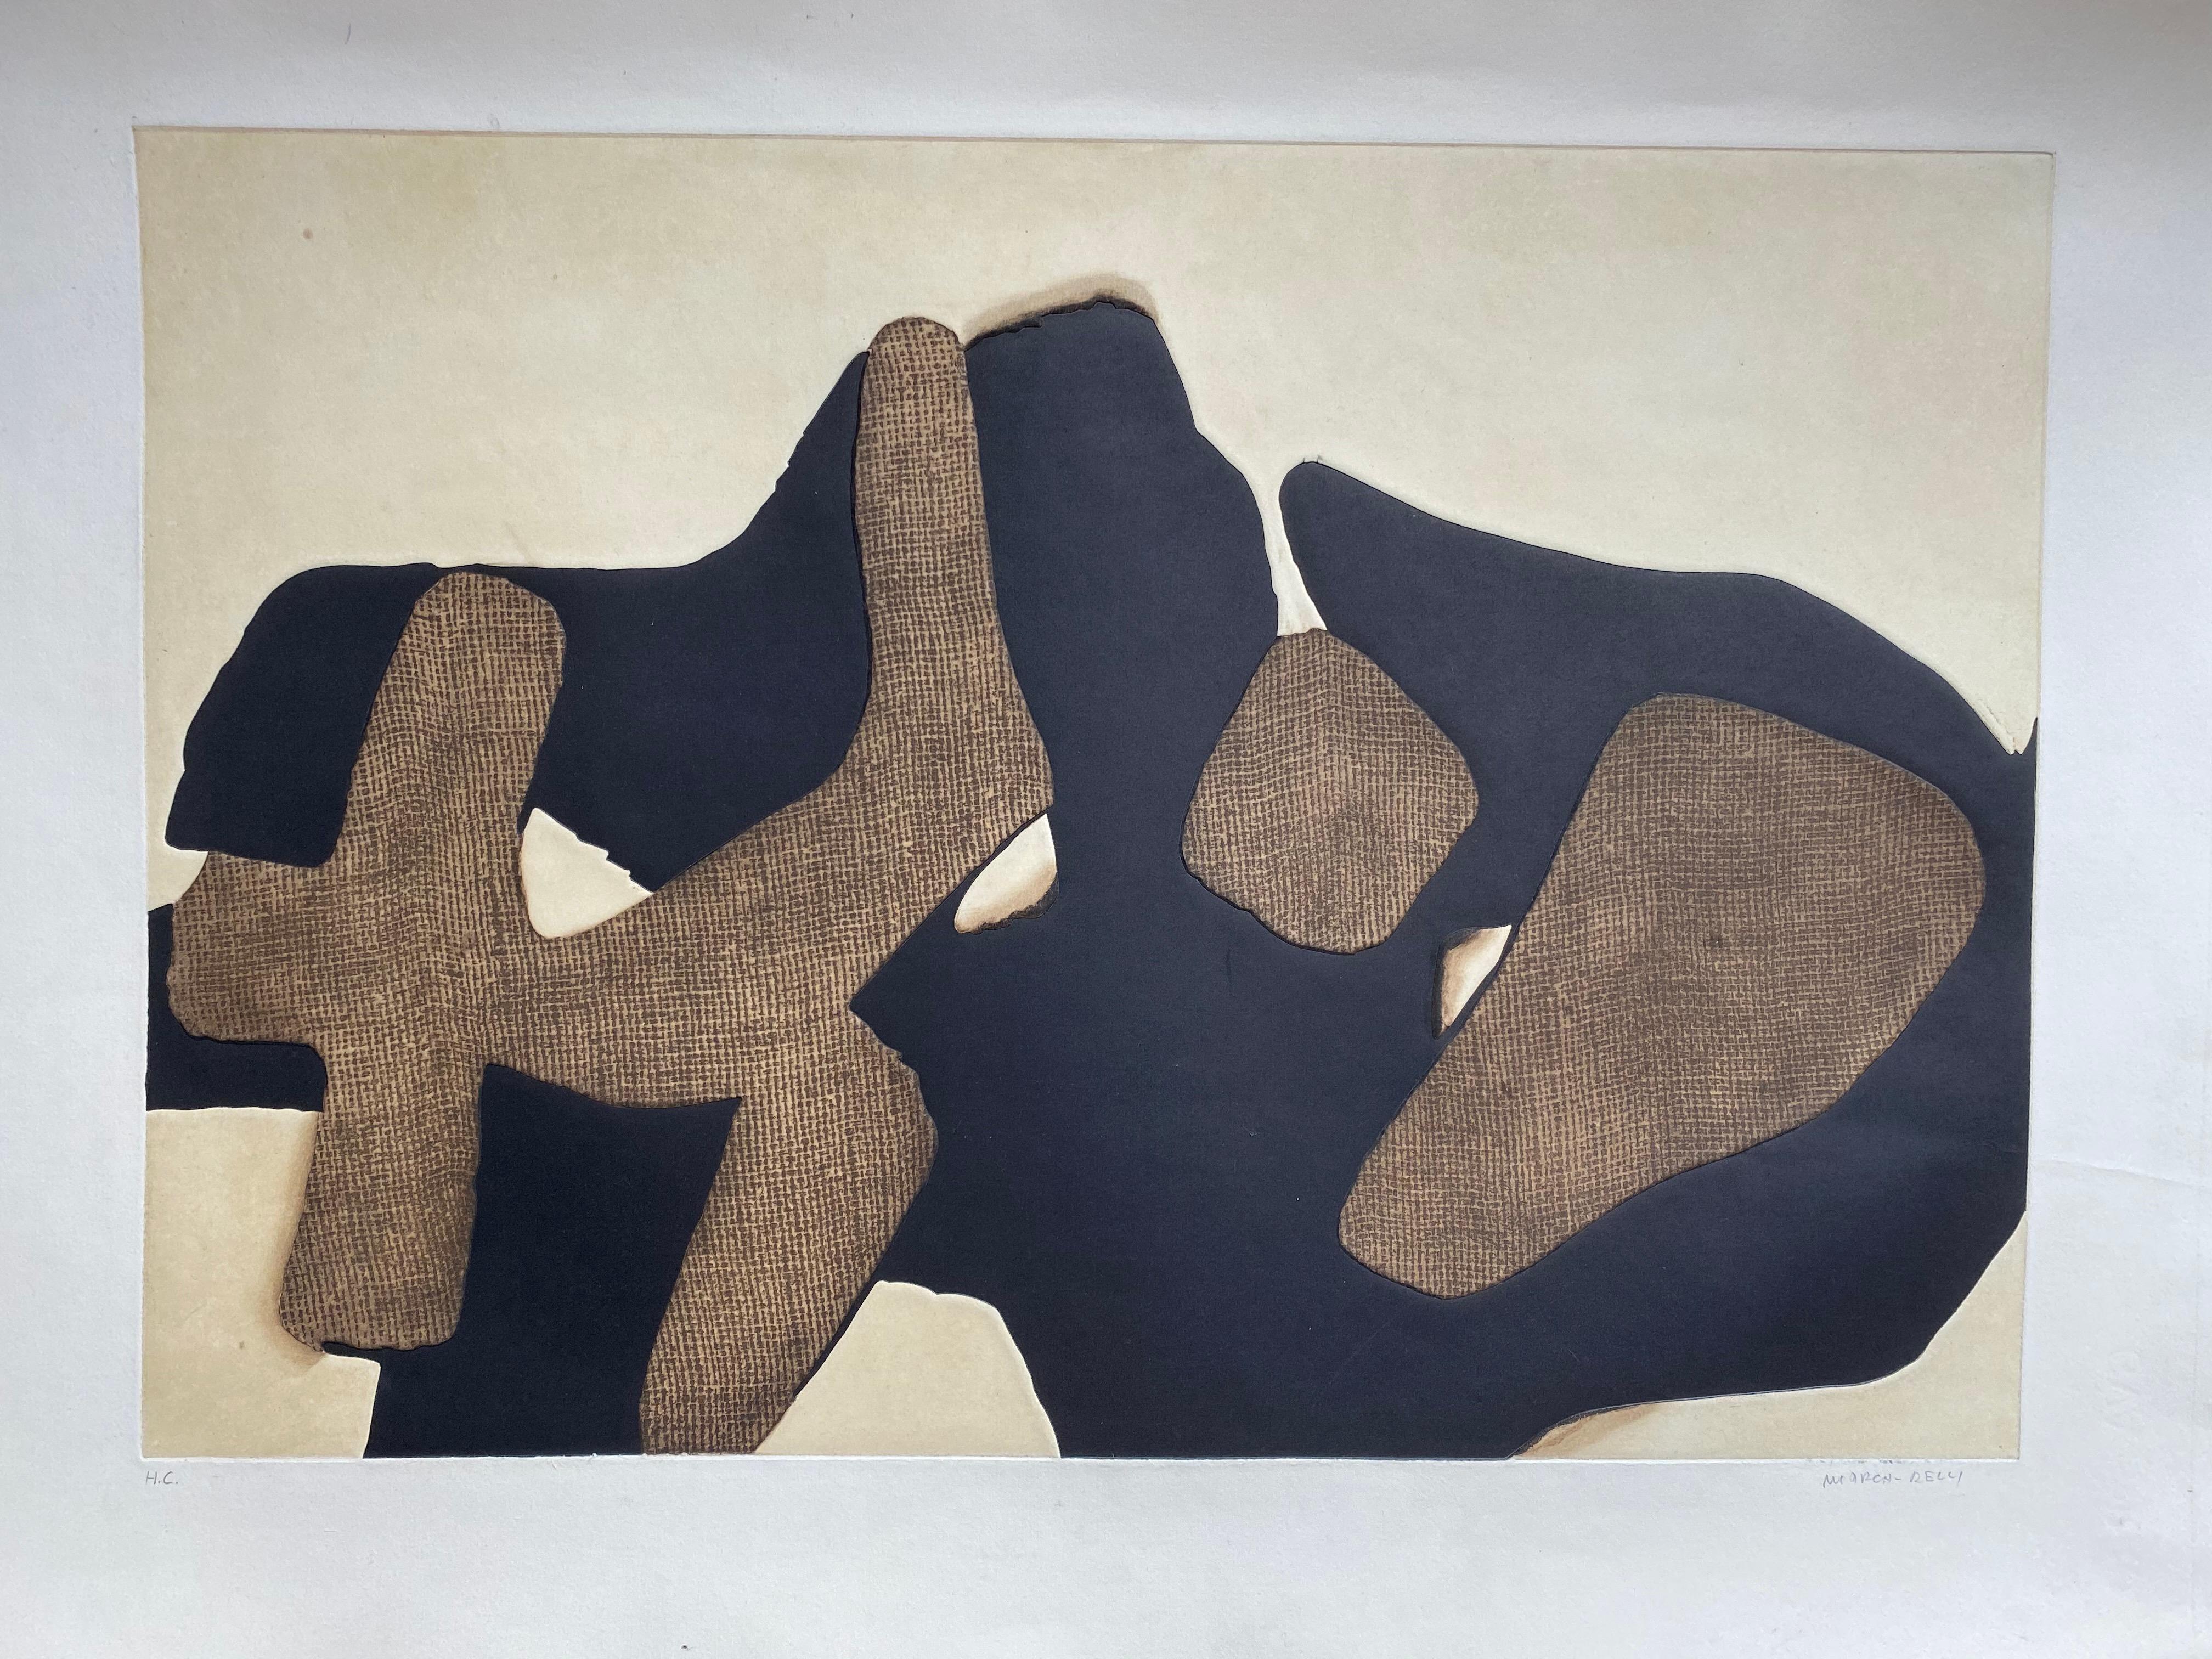 Conrad Marca-Relli
Composition
Lithography 
Mixed media on guarro paper
Poligrafa Edition
Numbered out of 75 and signed in pencil by the artist 
Circa 1977
76 x 56
Perfect condition 
1100 euros 